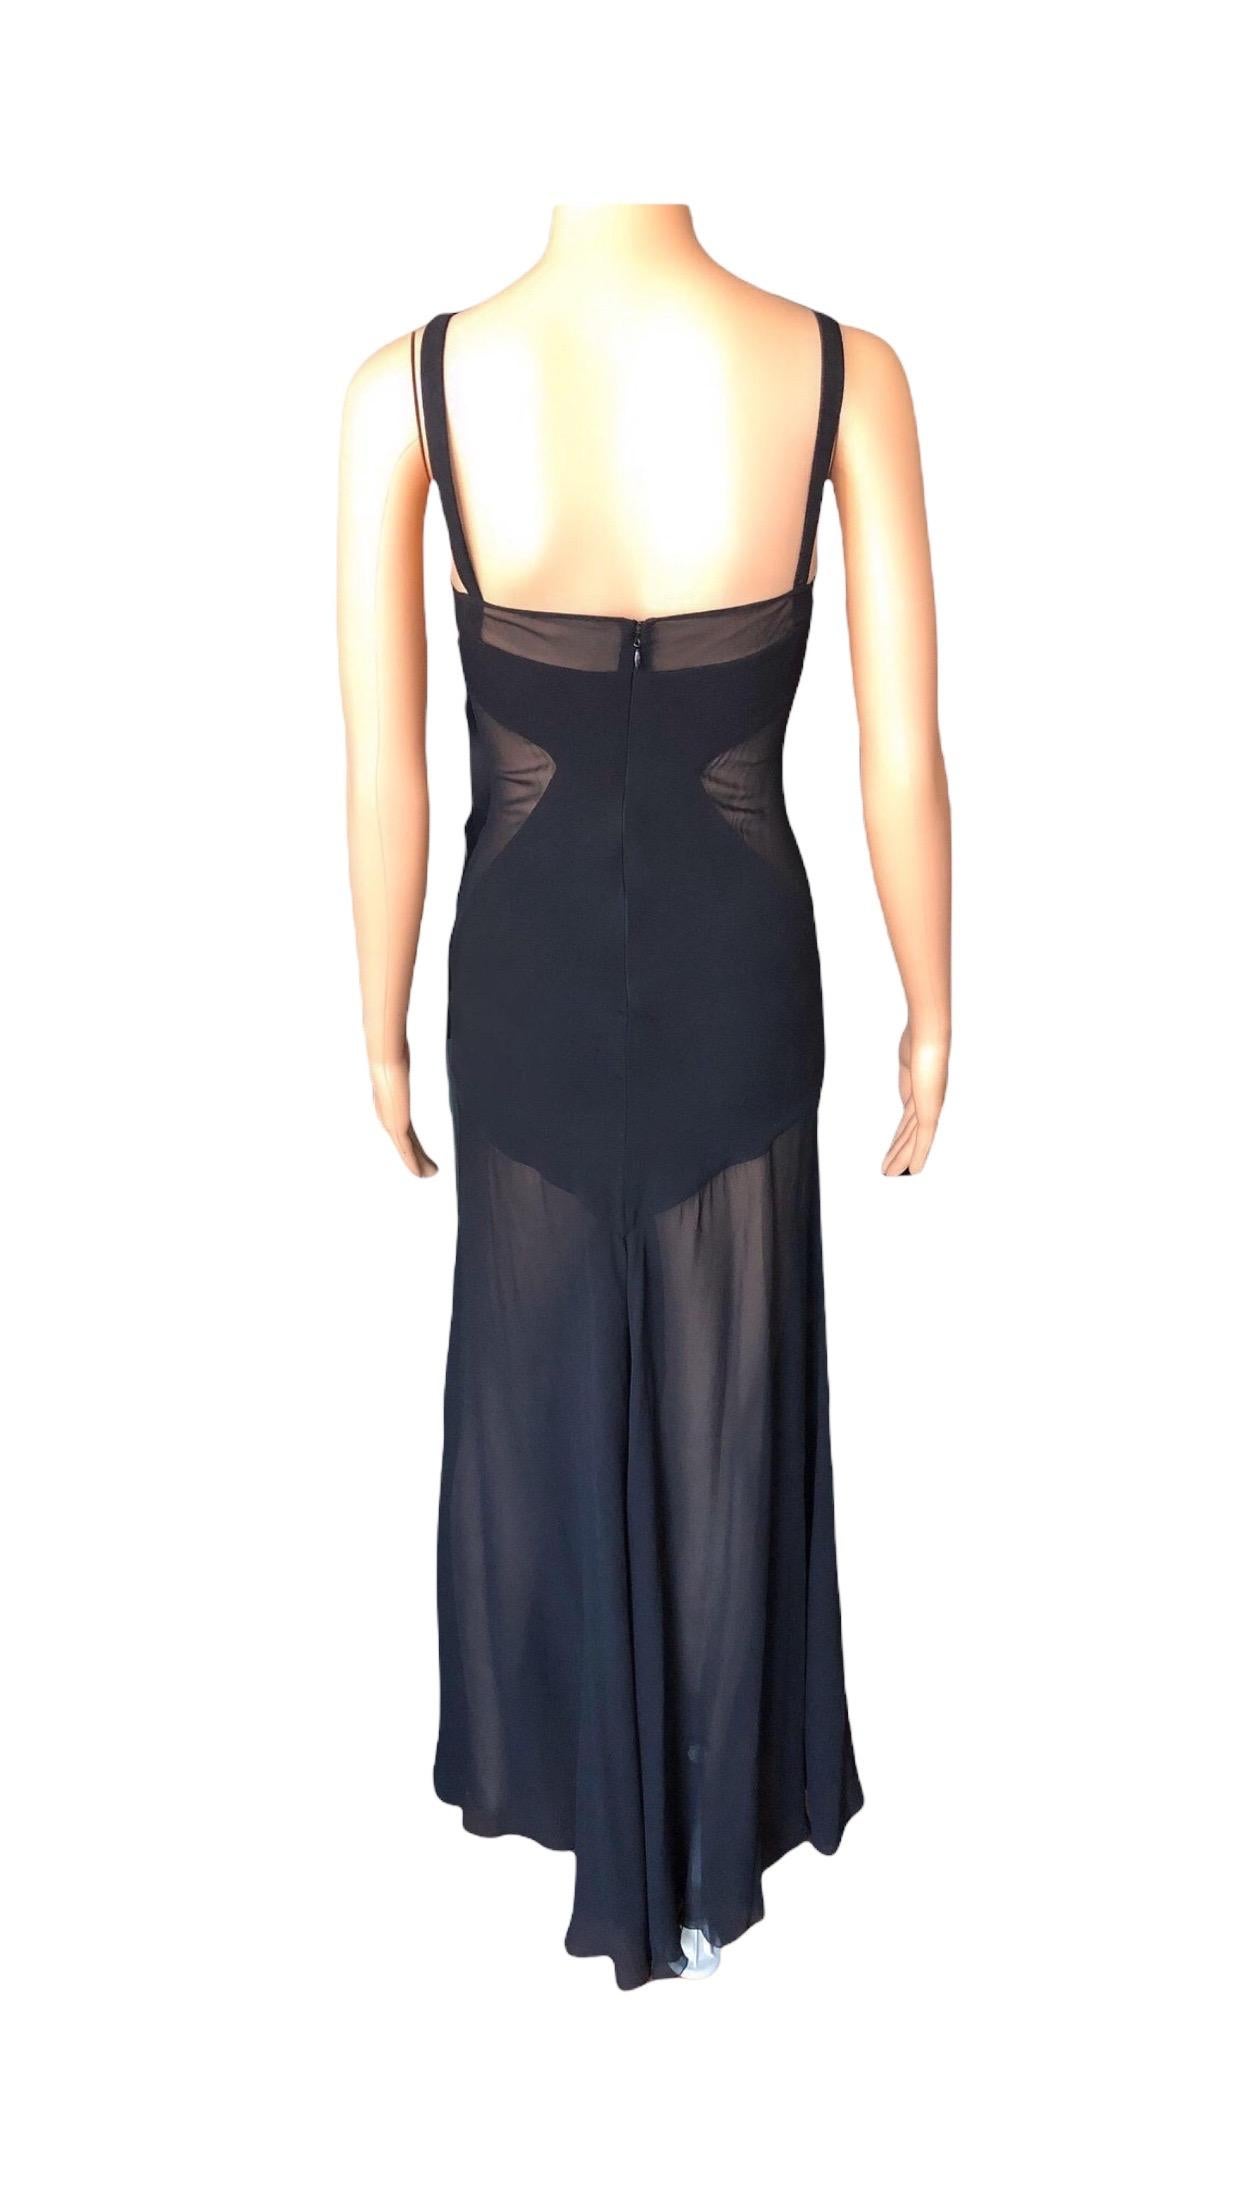 Gianni Versace S/S 1995 Vintage Sheer Panels Silk Black Gown Evening Dress For Sale 6